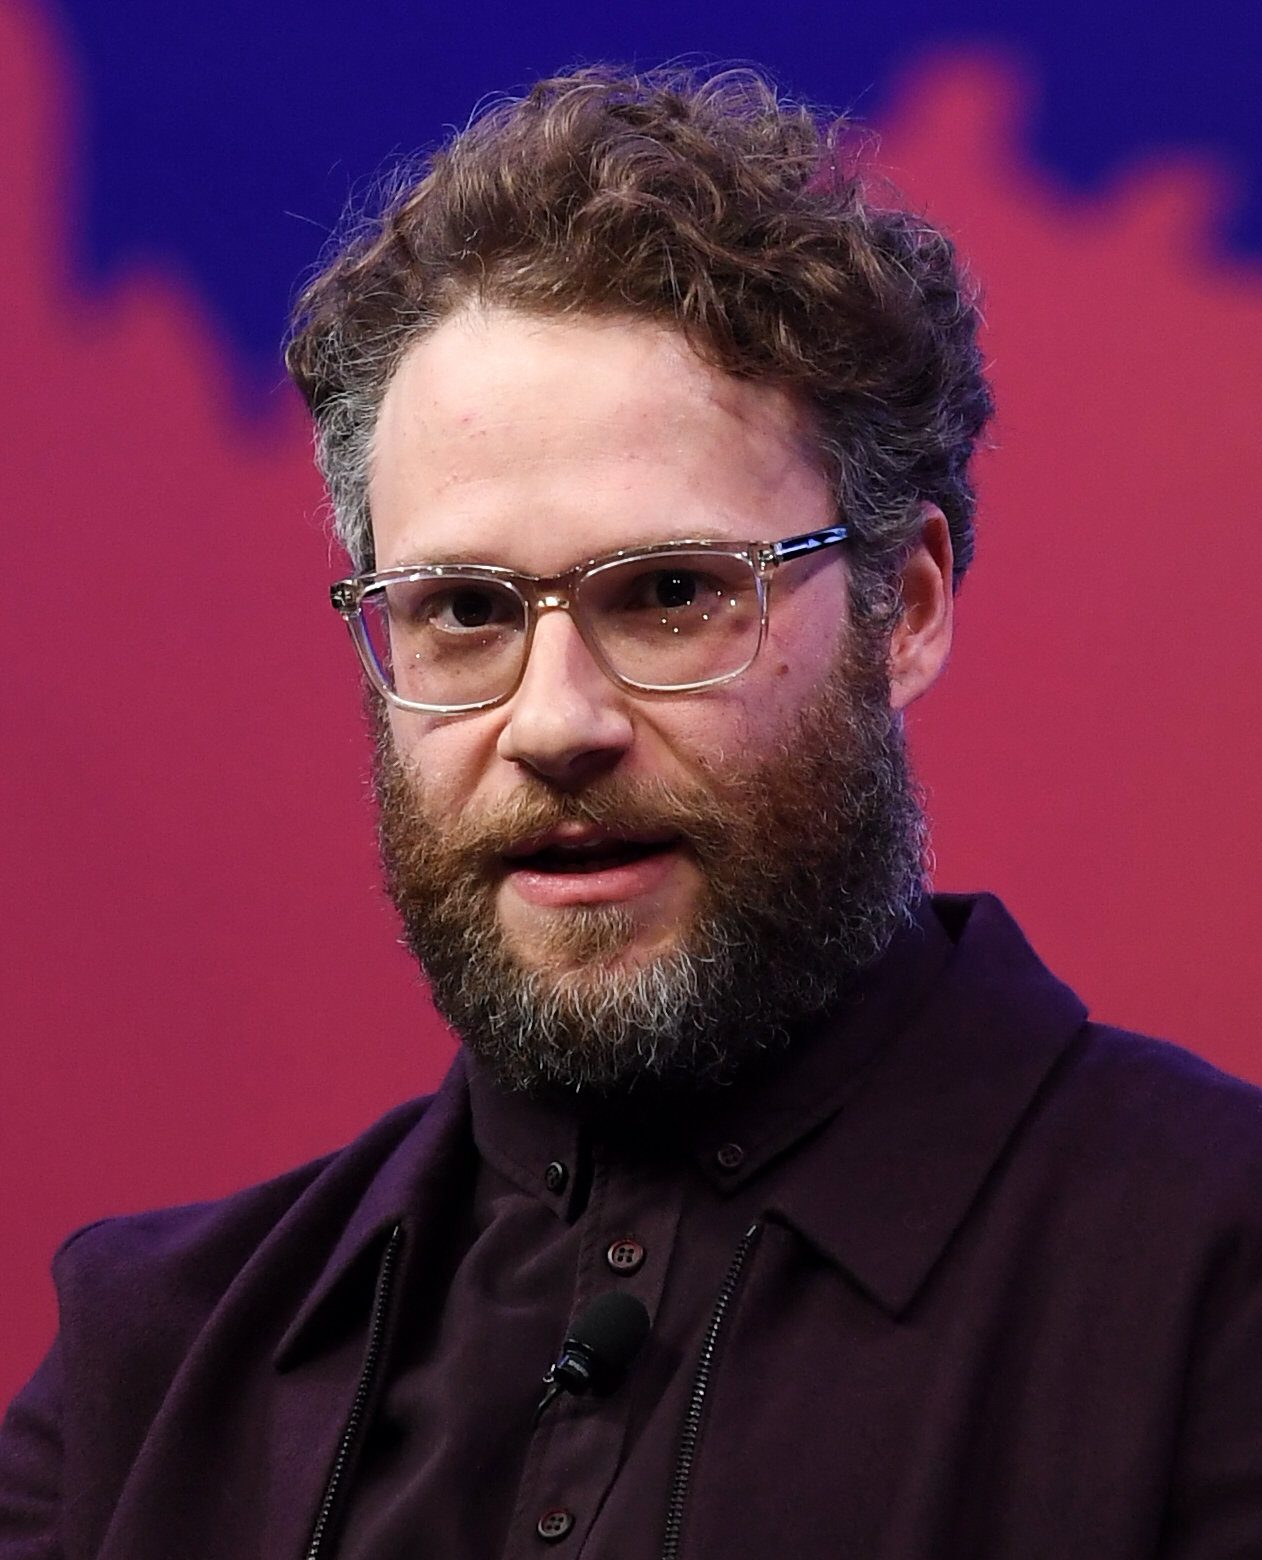 Seth Rogen Speaks About Emmys COVID Measures to Kick off Show!